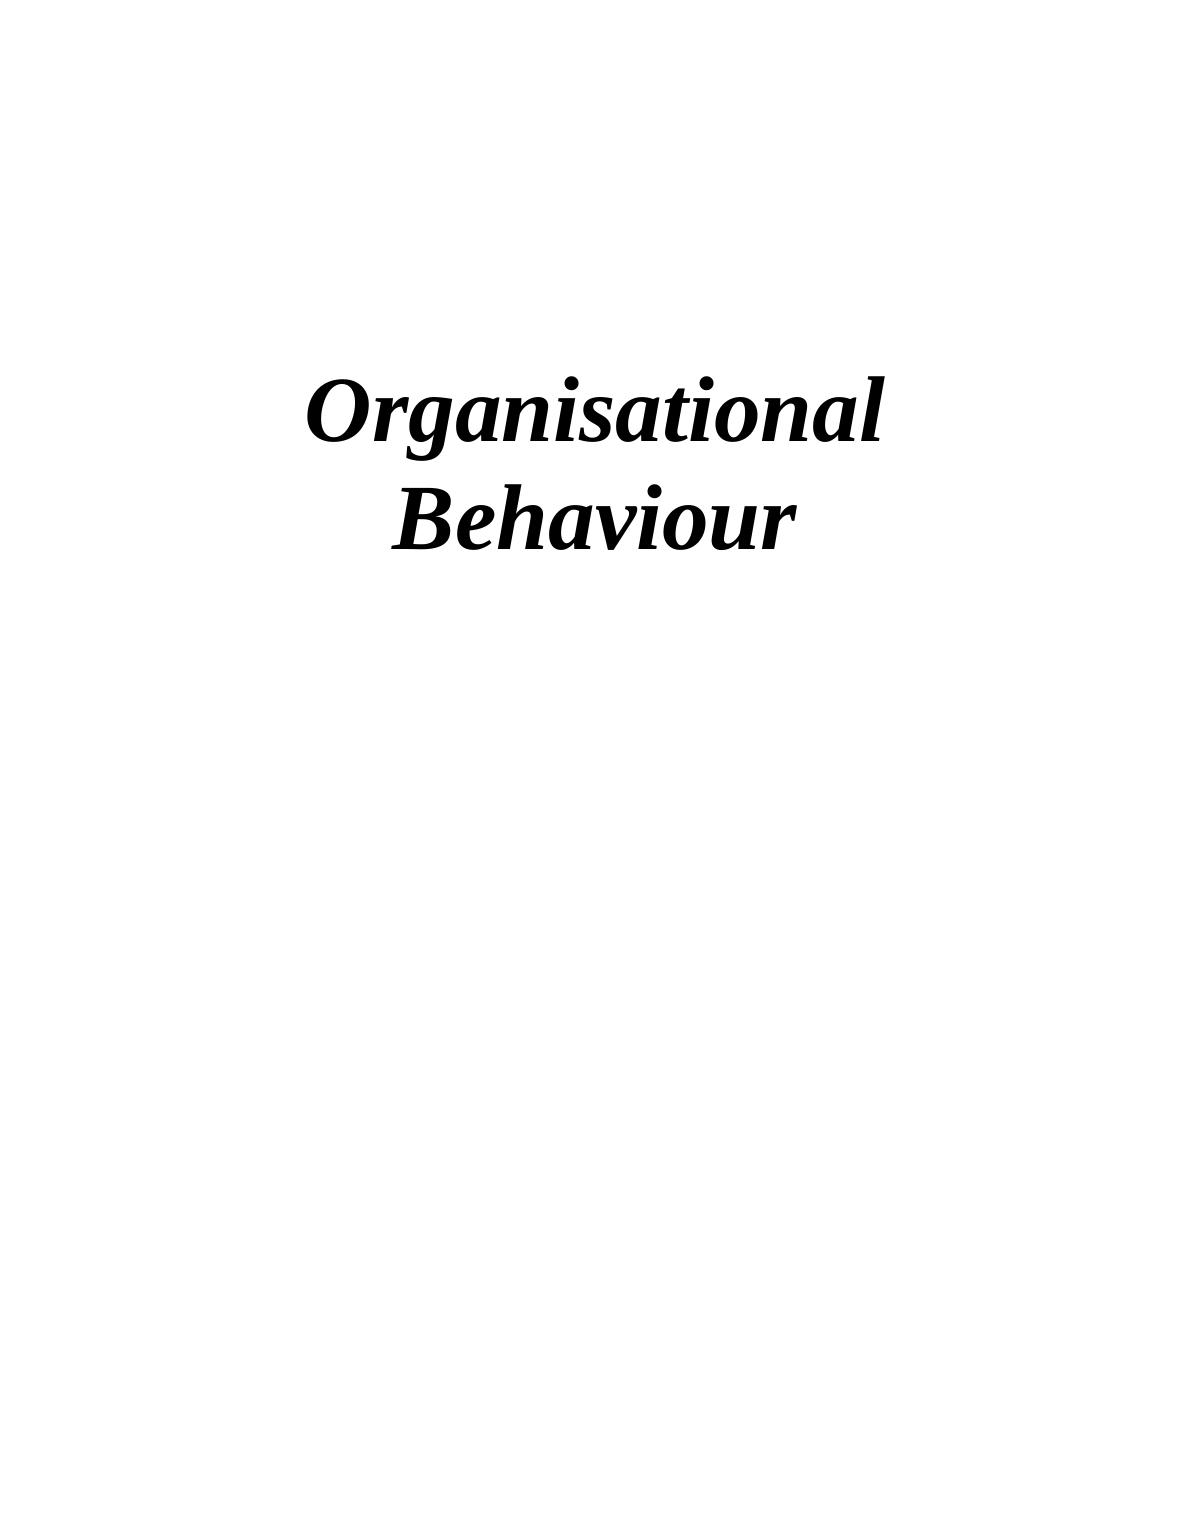 Effects of Culture, Power and Politics on the Organisation - Assignment_1